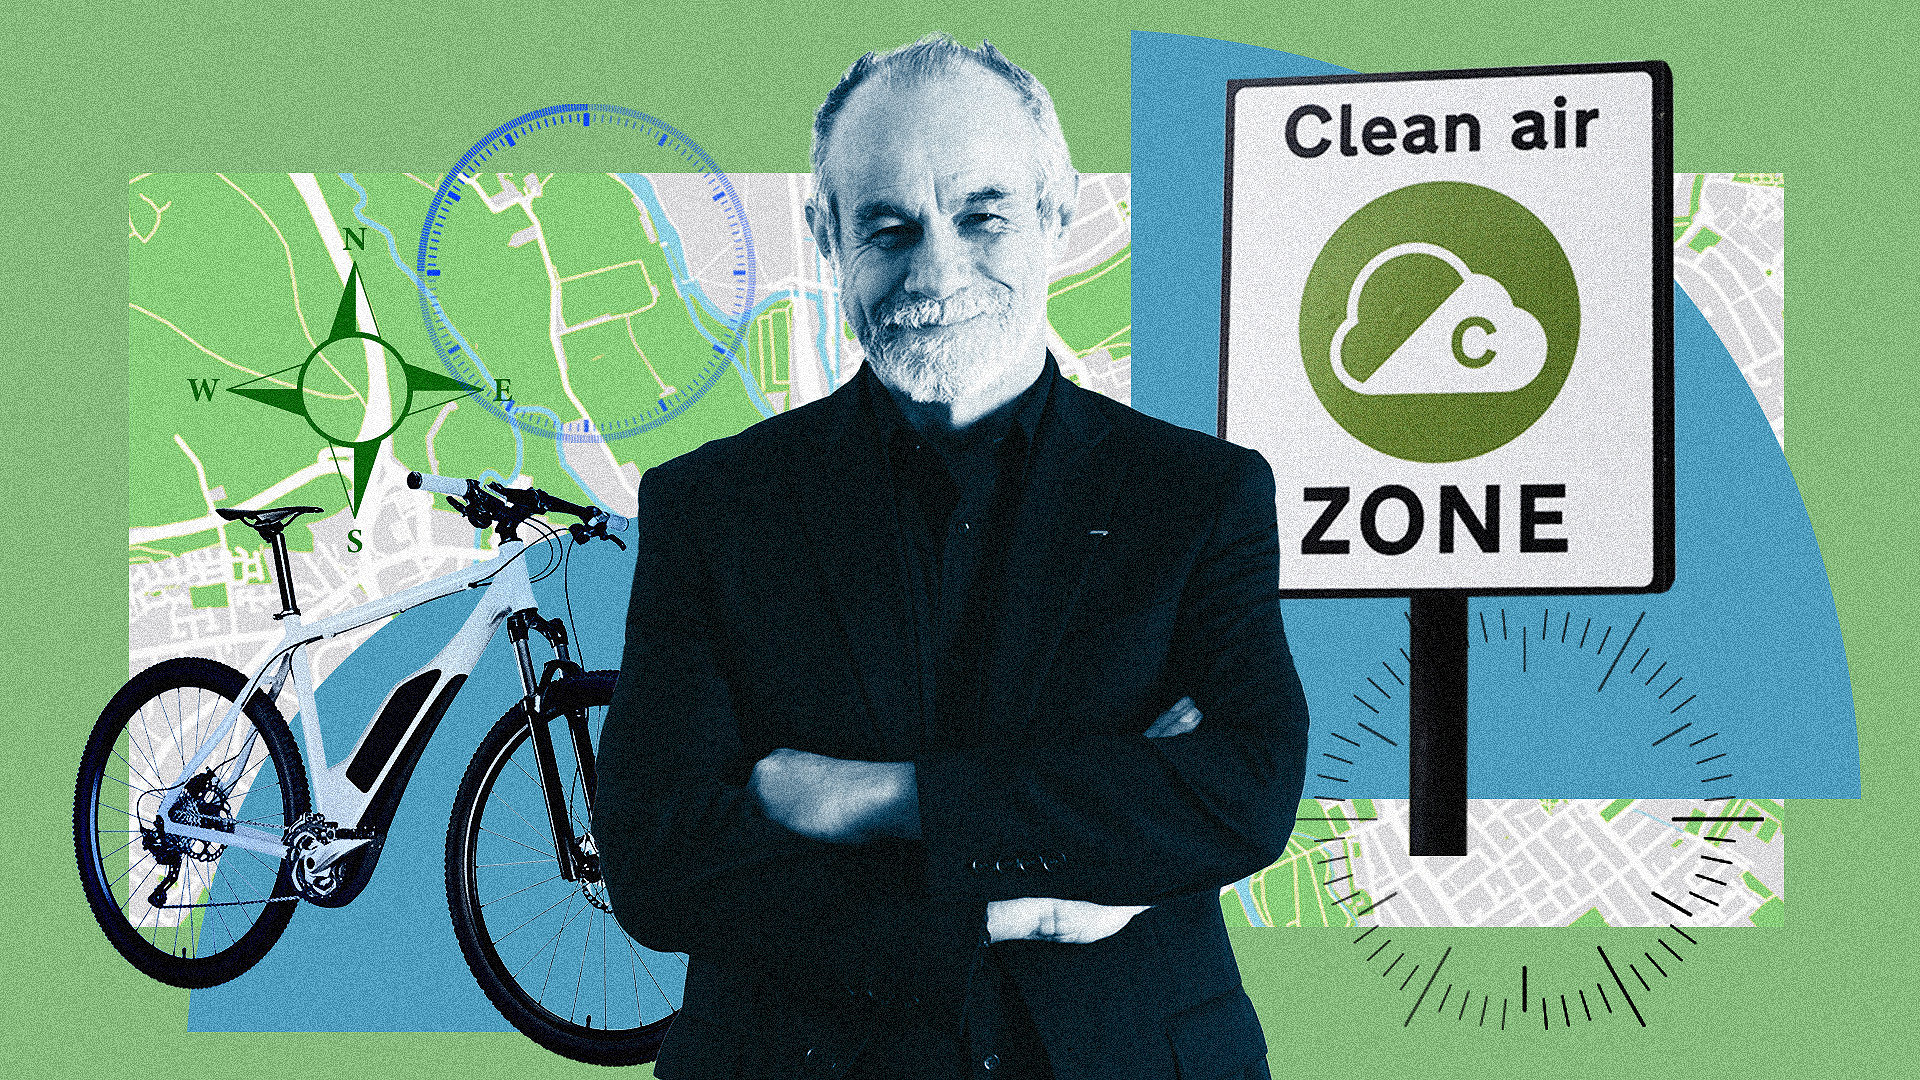 Carlos Moreno and collage illustration featuring a map, bike and clean air zone sign